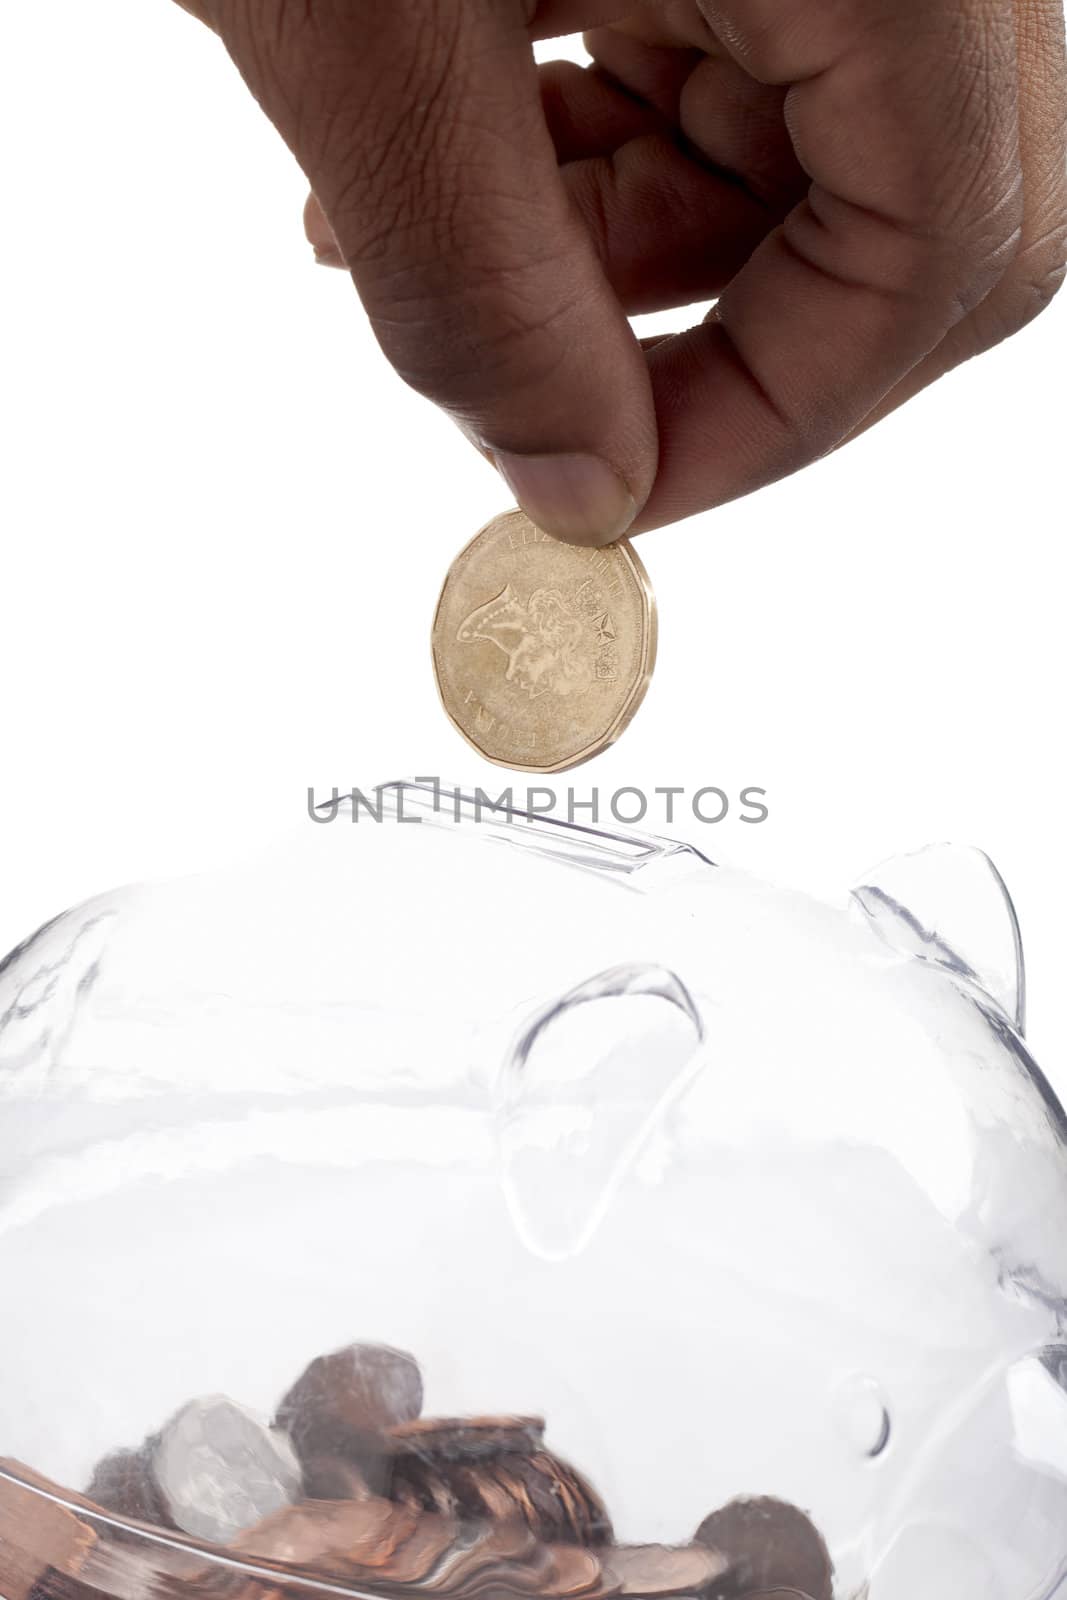 A close-up portrait of a hand dropping a coin on a transparent piggy bank